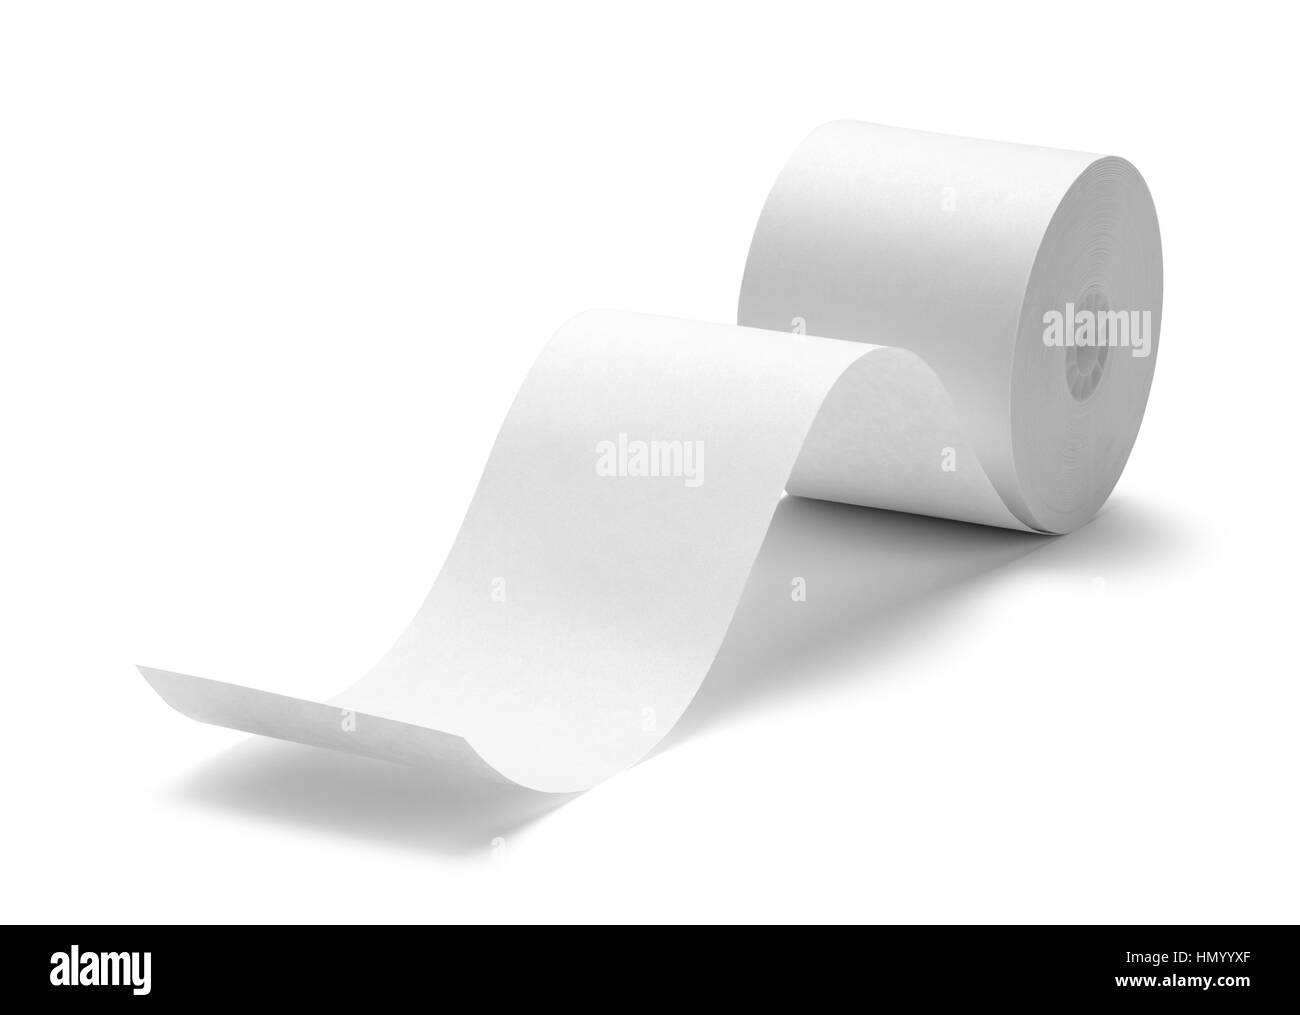 Blank Cash Register Receipt Roll Isolated on White Background. Stock Photo